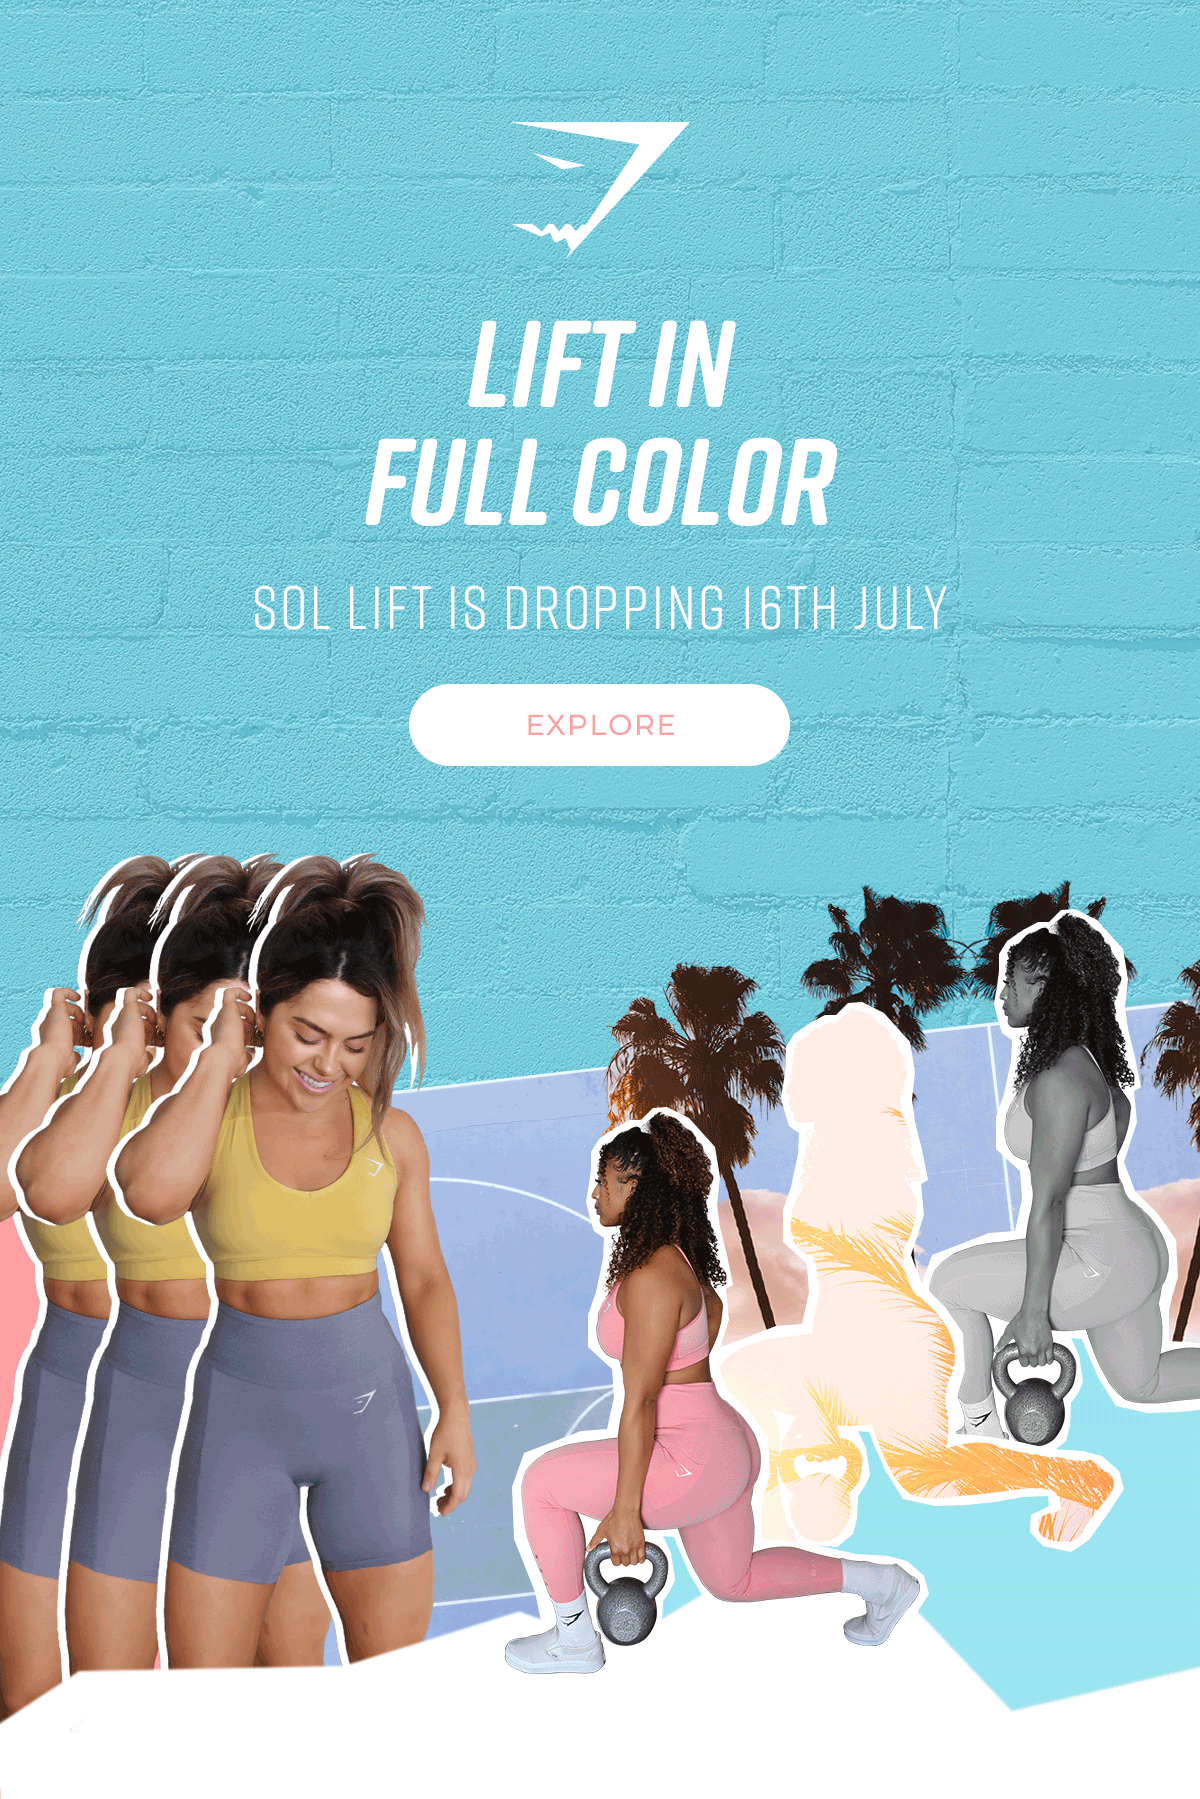 LIFT IN FULL COLOR. SOL LIFT is dropping 16th JULY. Explore.